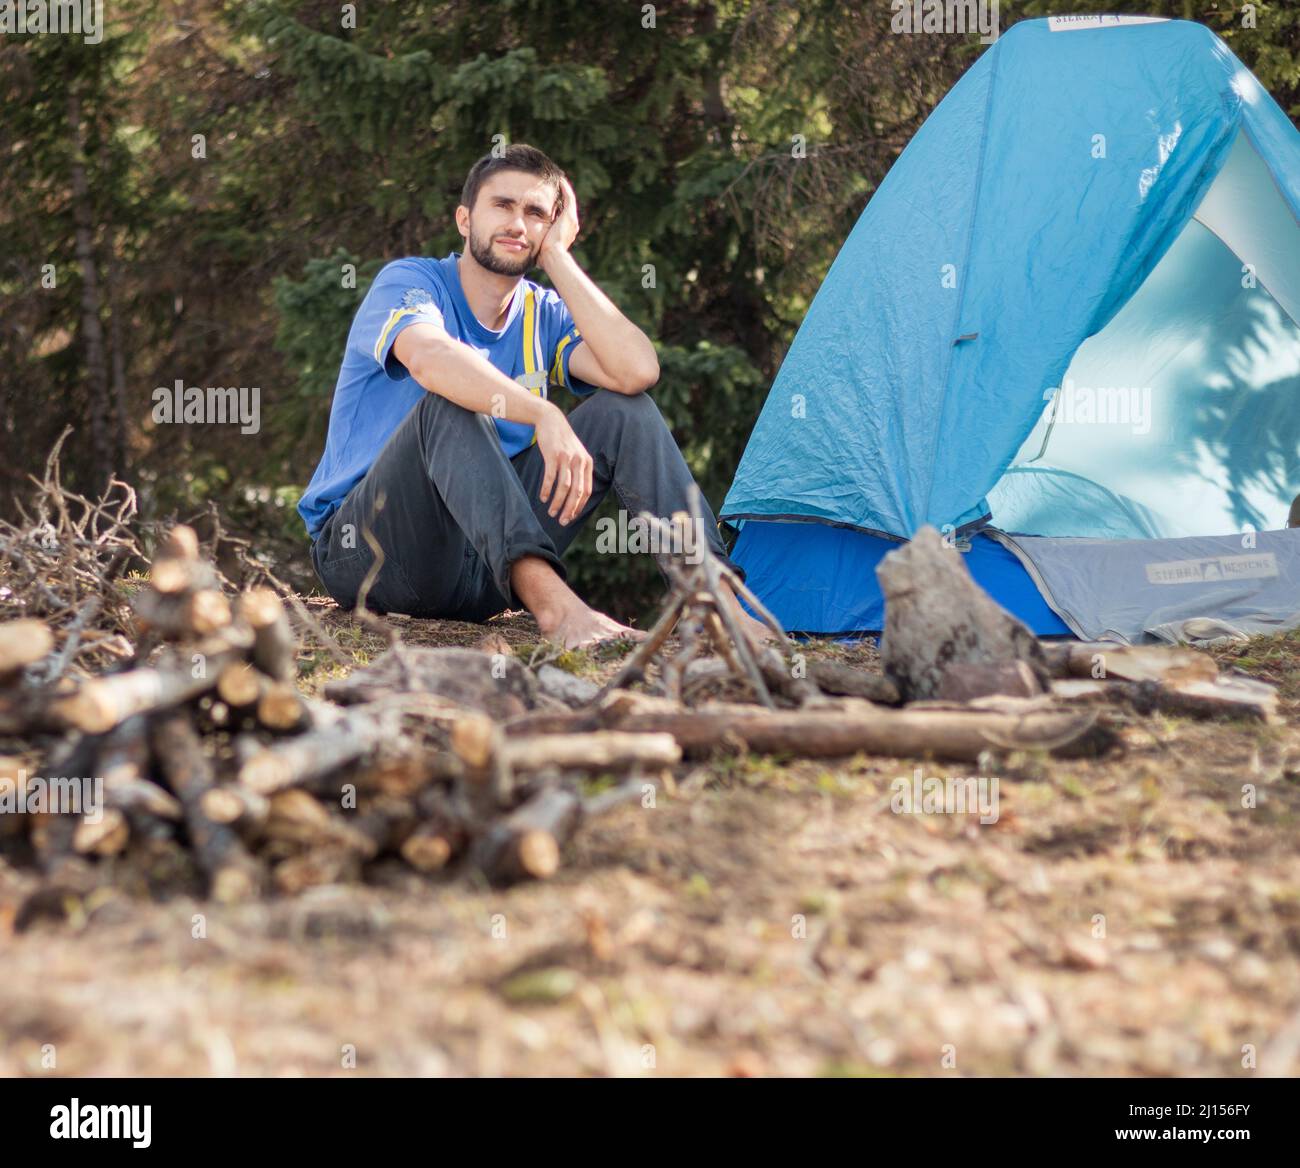 Bored at campsite in the wild Stock Photo